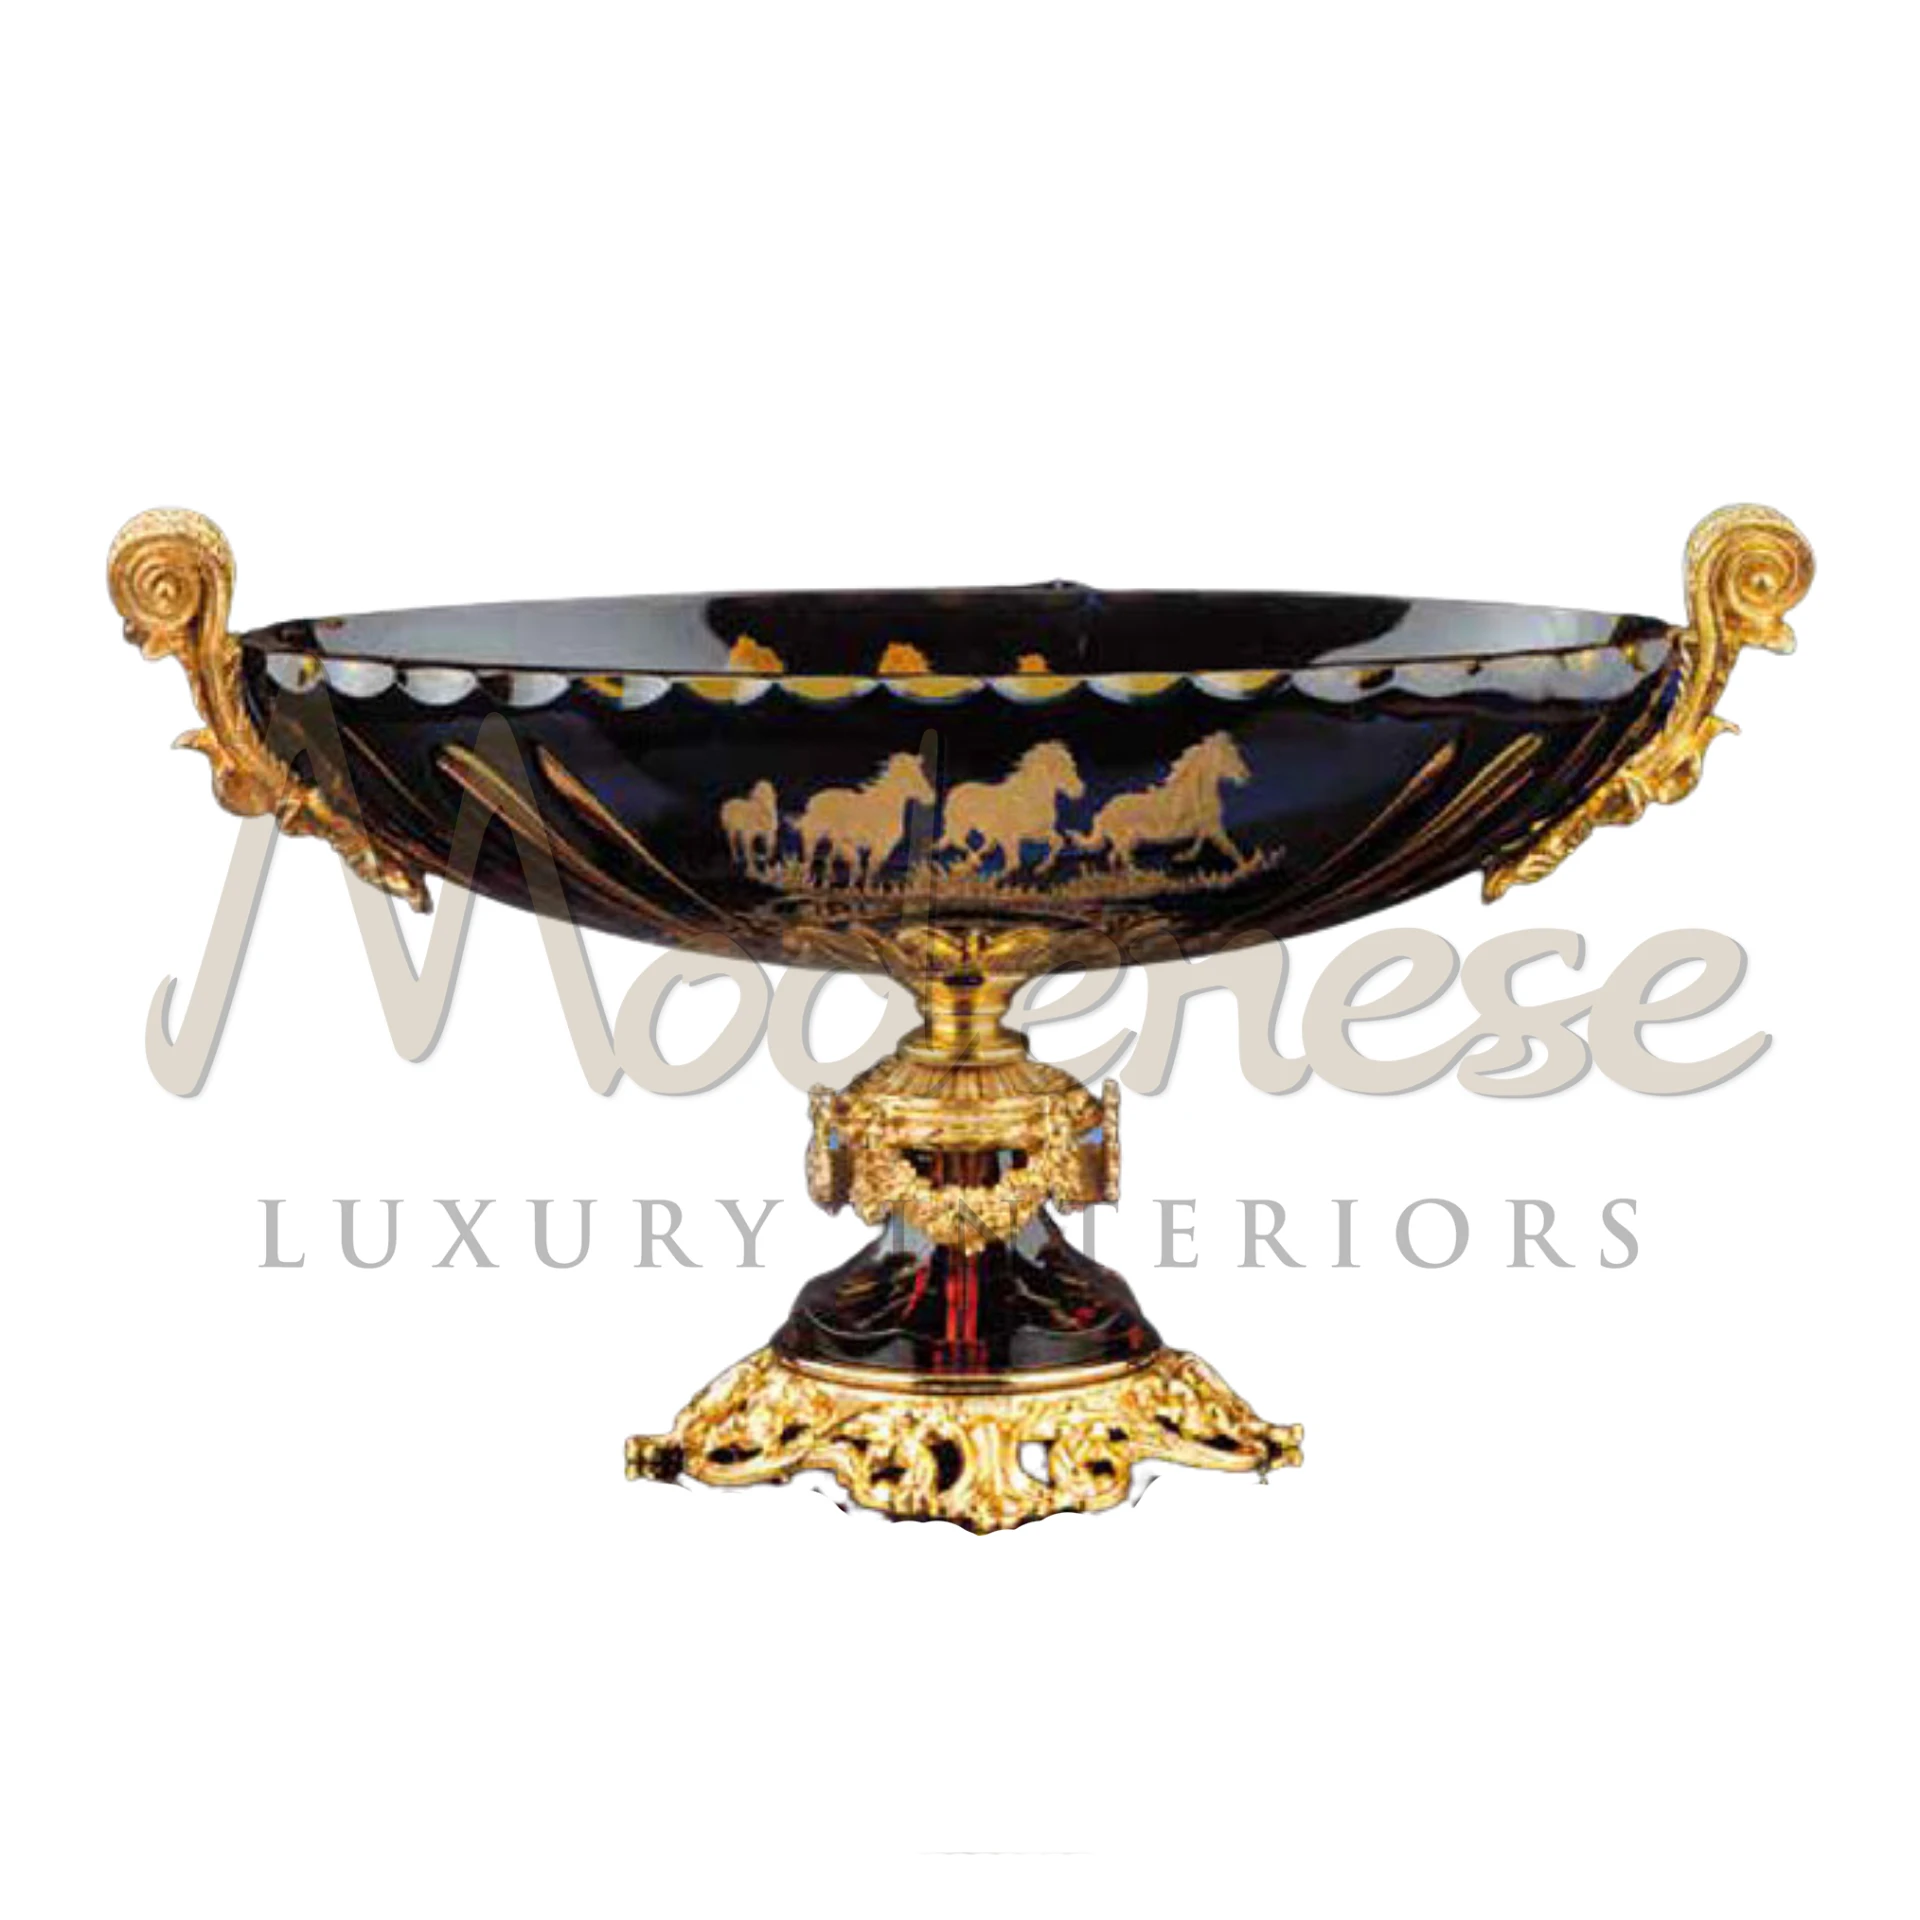 High-end Luxury Dark Glass Bowl, exuding sophistication and elegance, perfect for enhancing the luxury of interior spaces.